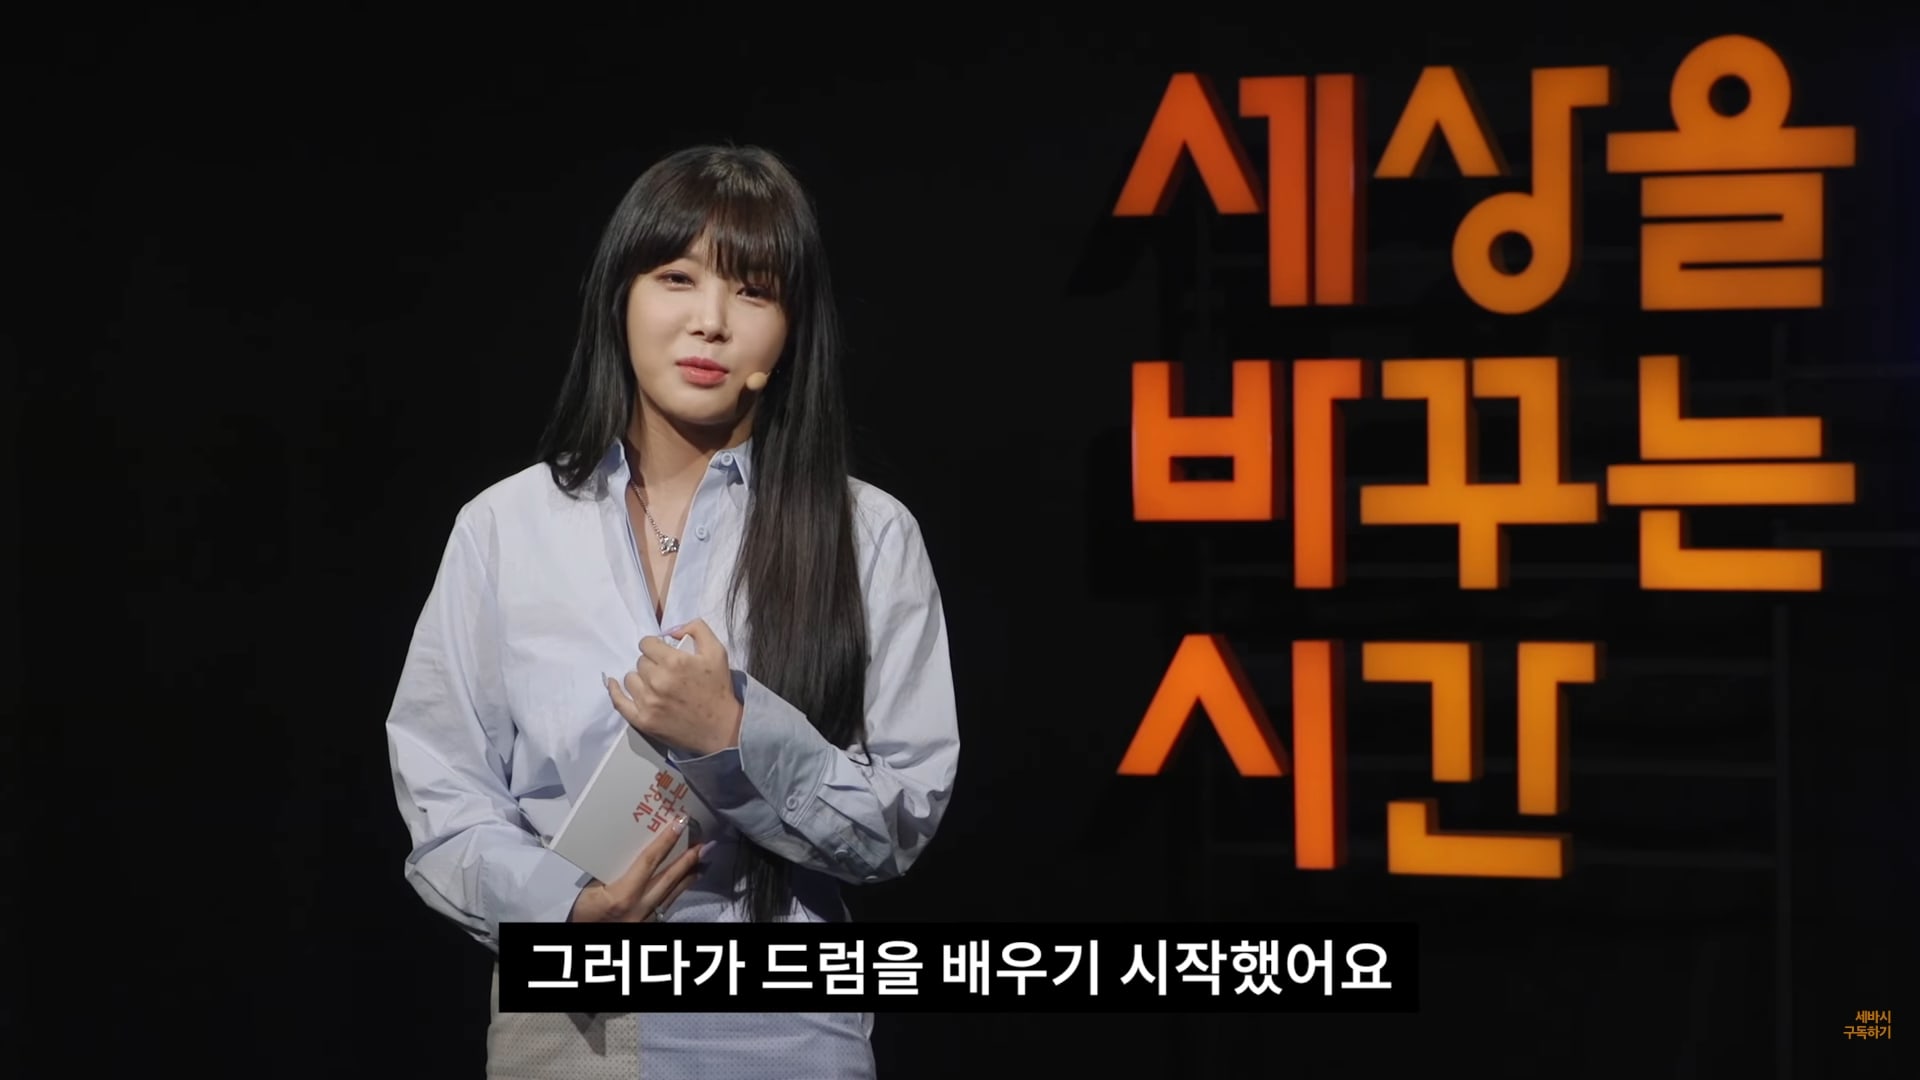 yubin-shares-her-thoughts-on-how-she-found-herself-through-her-career-2